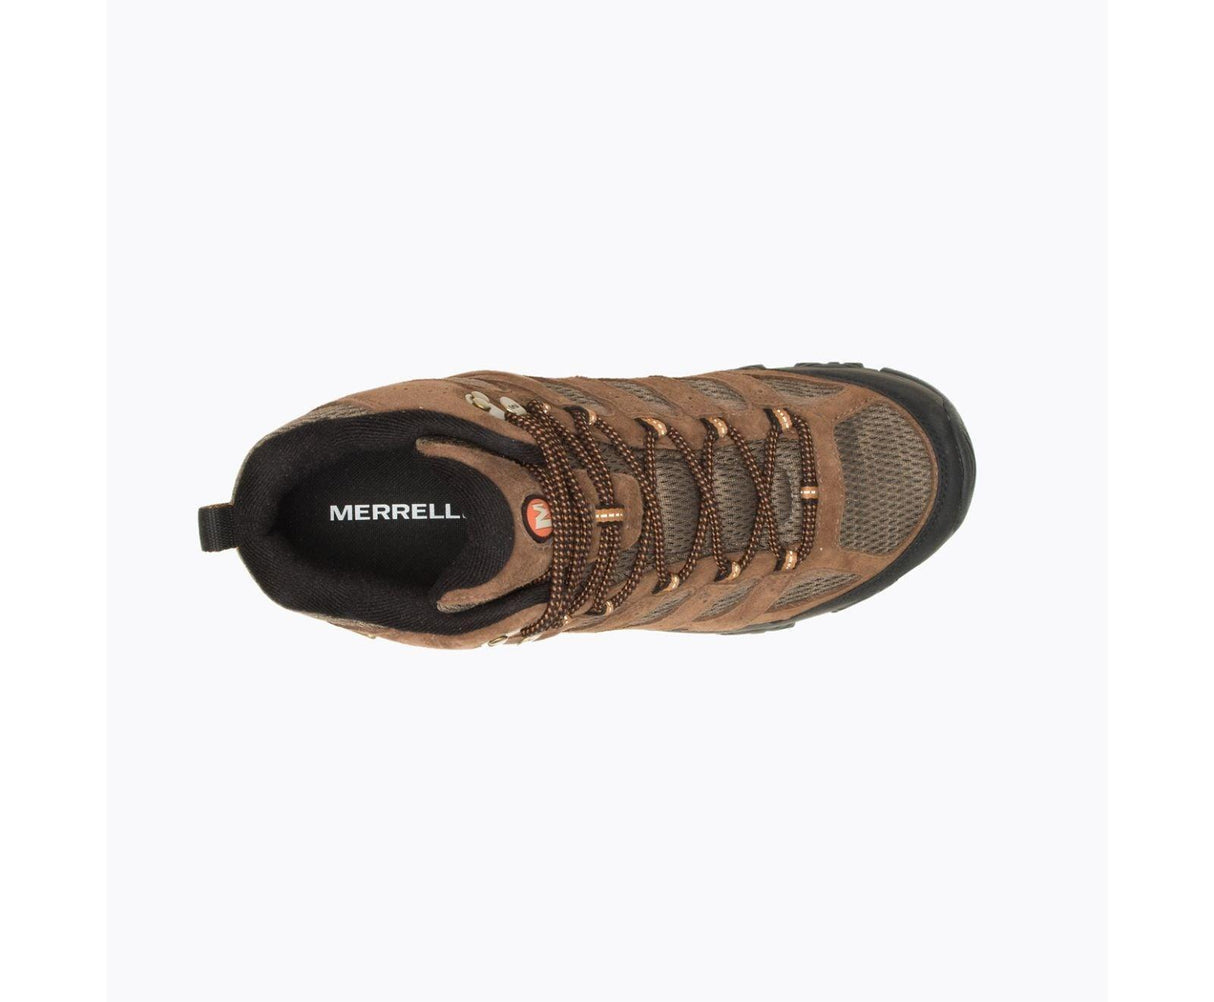 Merrell Men's Moab 3 Mid Wtp Hikers - A&M Clothing & Shoes